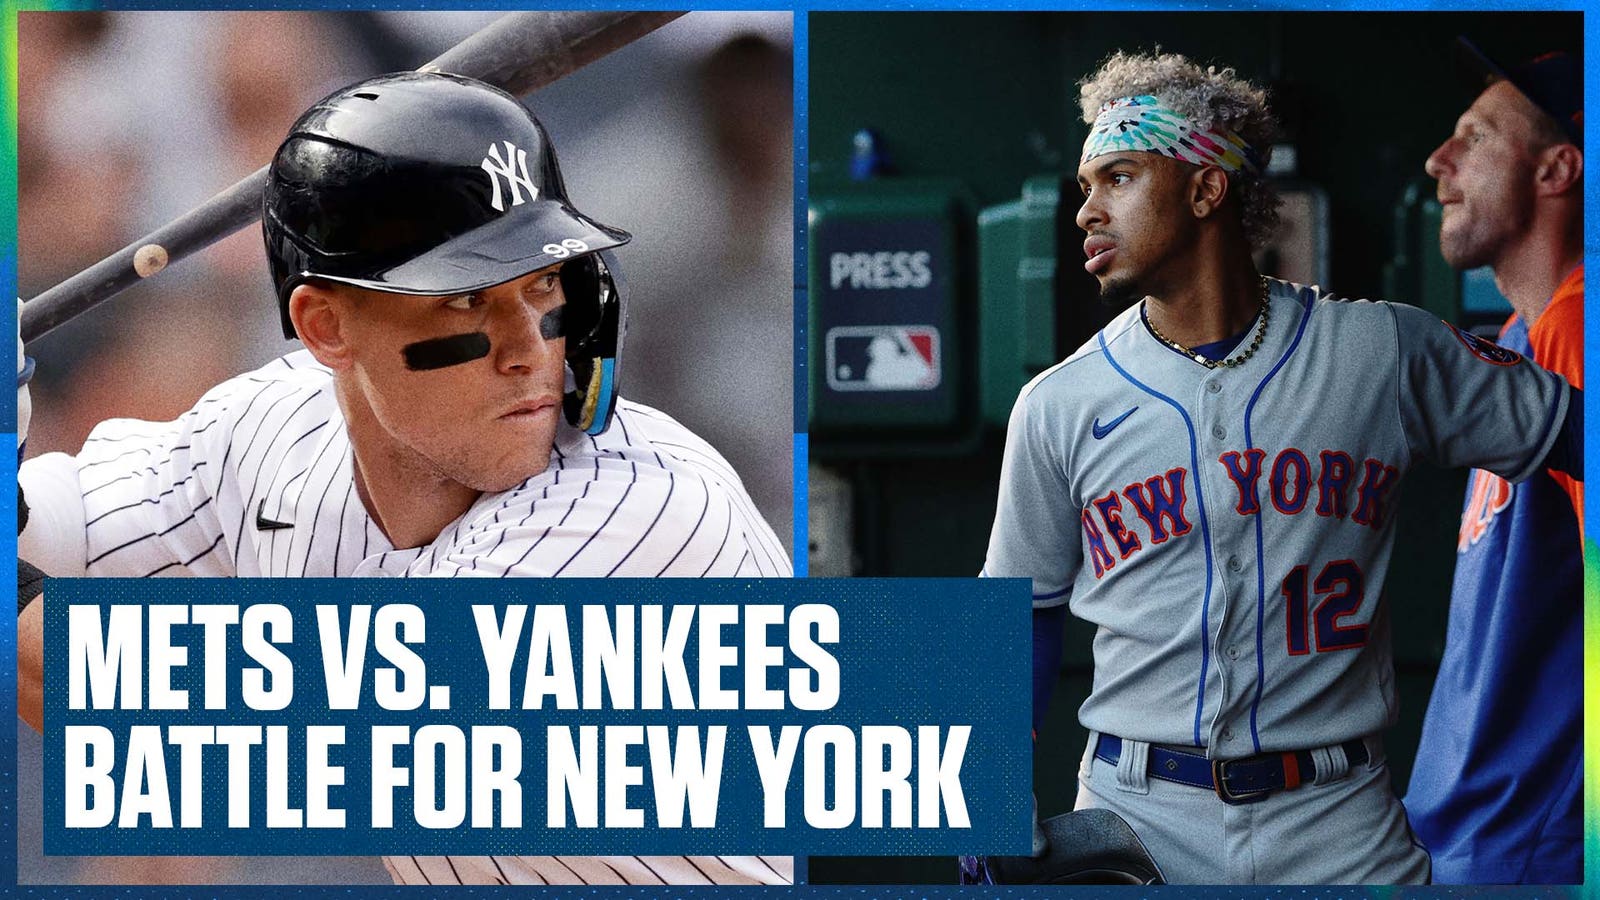 Mets, not Yankees, are the New Kings of New York